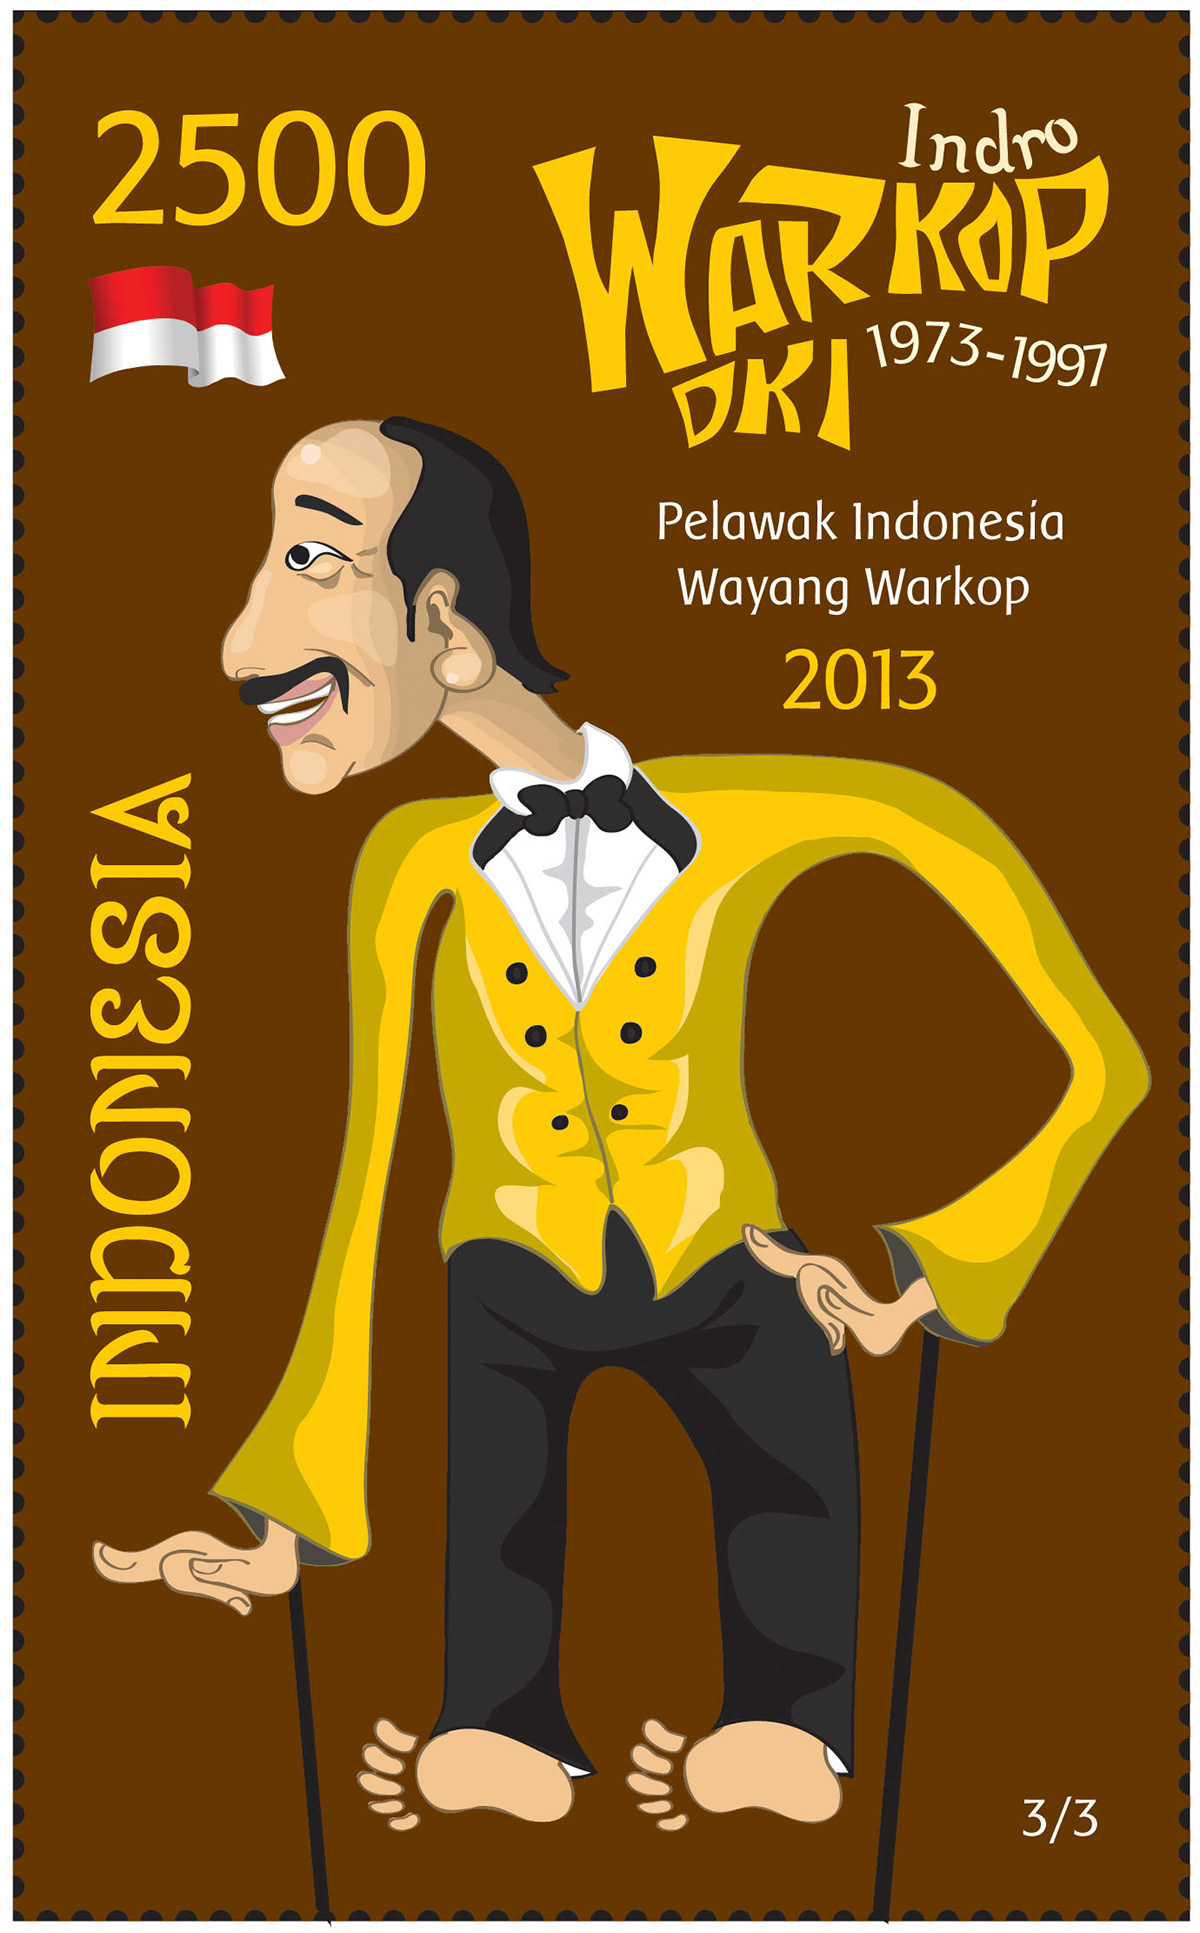 #Stamp #warkop DKI #illustration #dono kasino indro #indonesian culture indonesian puppet puppet legend indonesia's legend Character Wayang